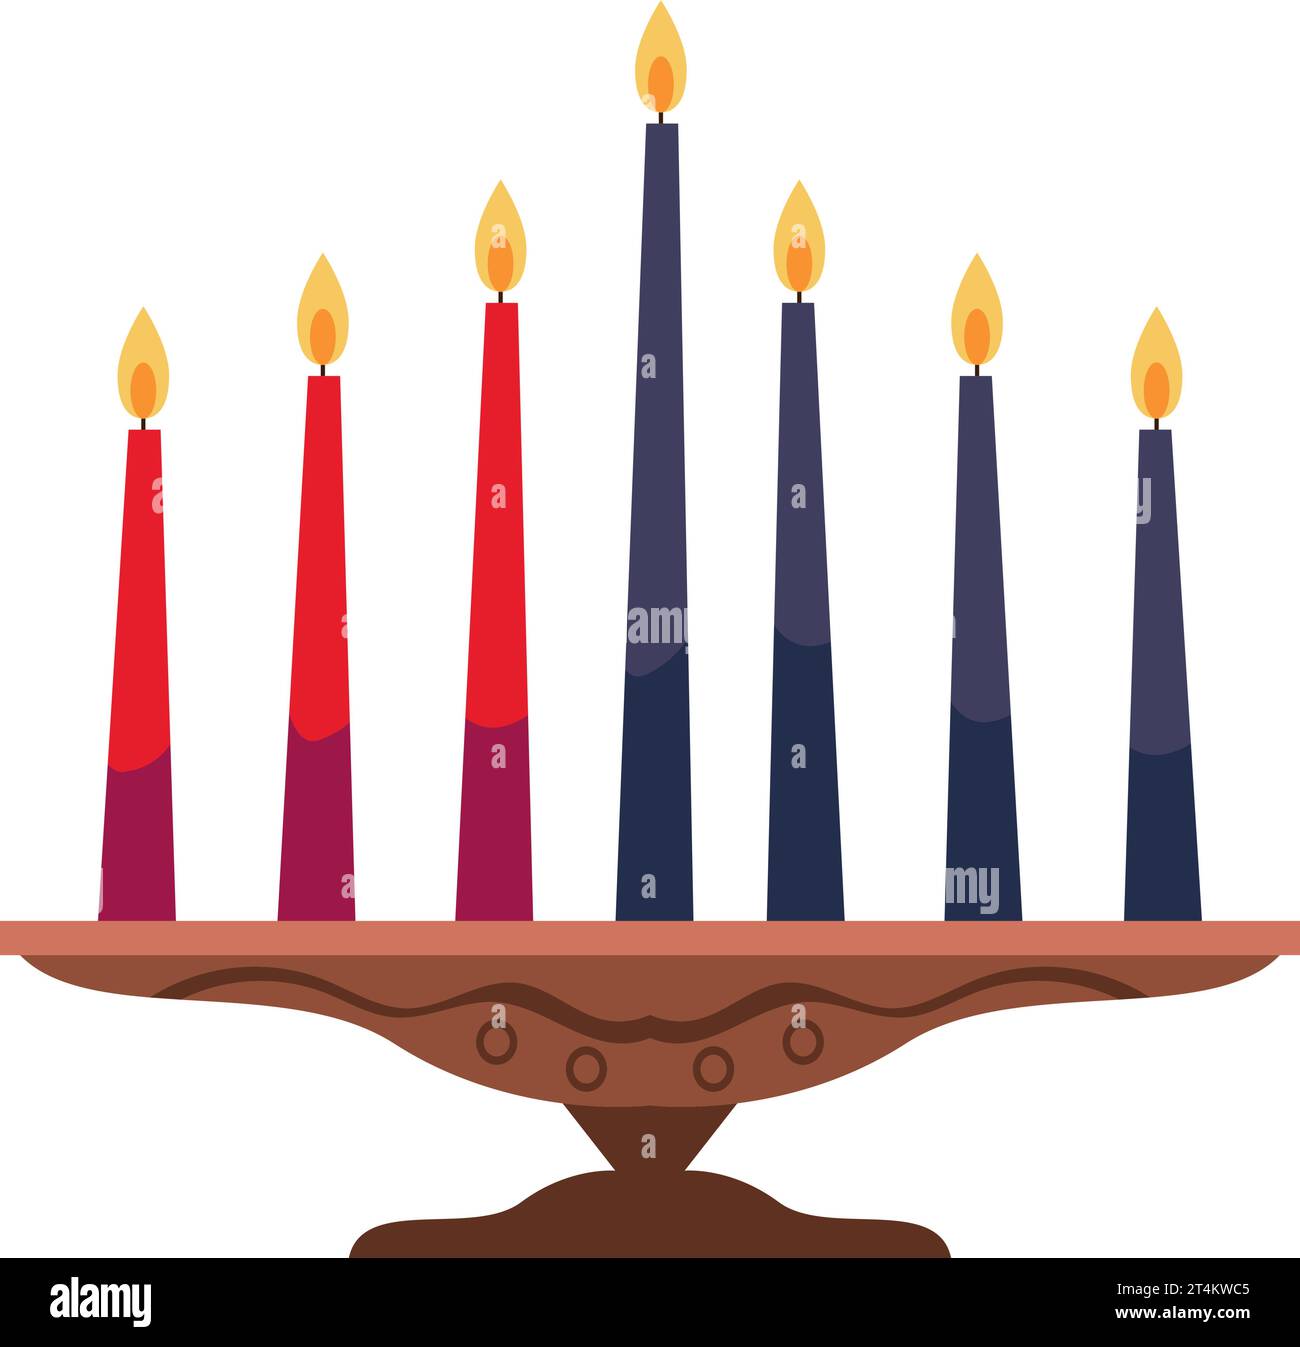 Kwanzaa background hi-res stock photography and images - Page 3 - Alamy